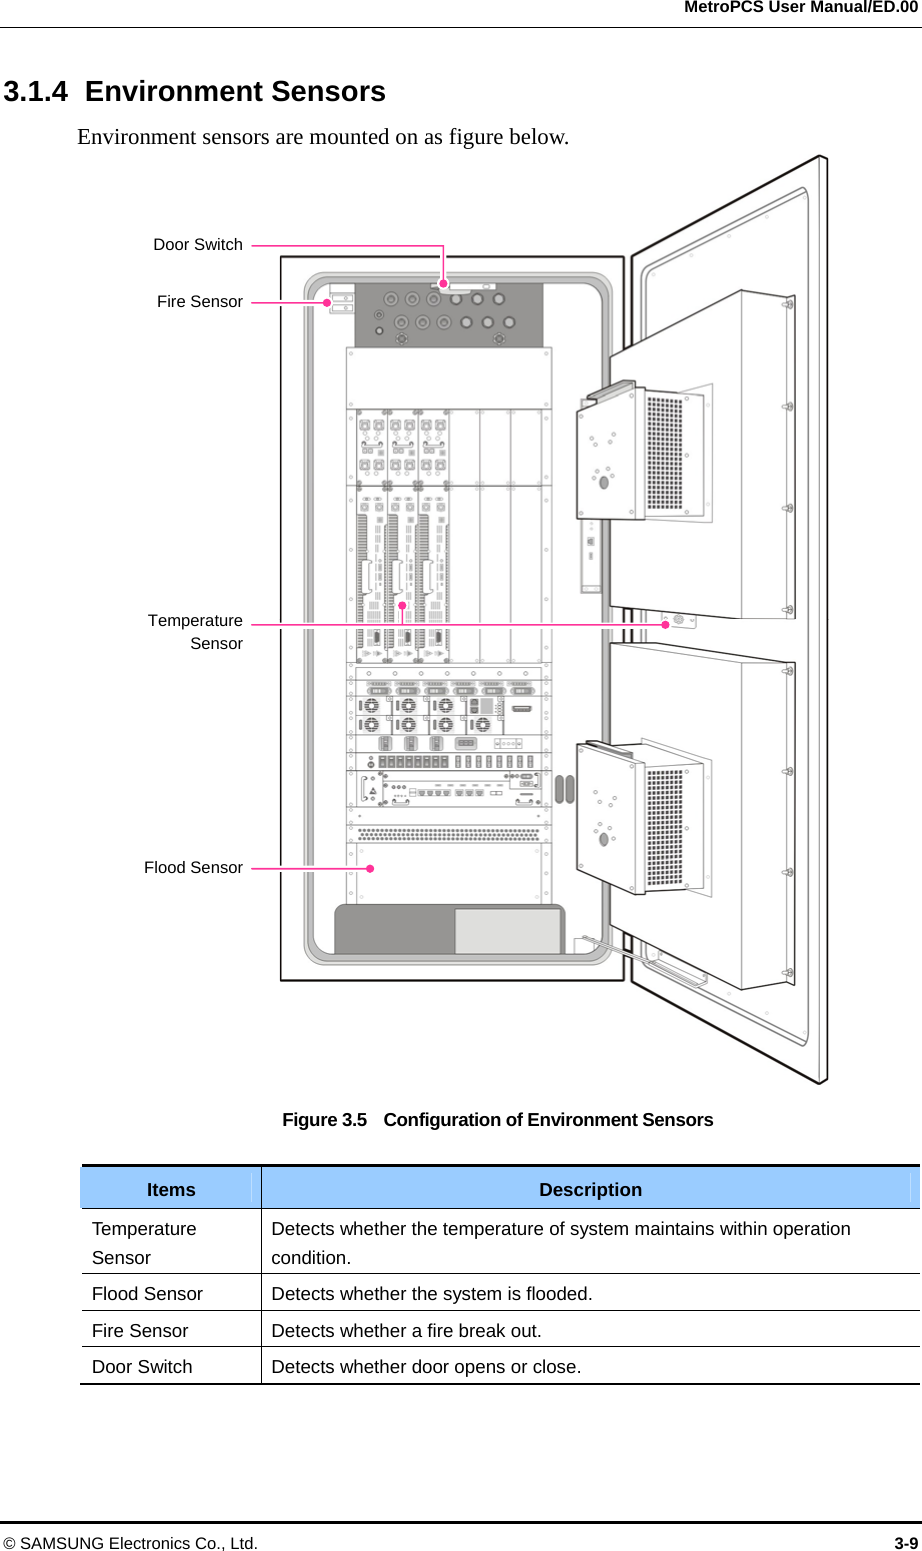  MetroPCS User Manual/ED.00 © SAMSUNG Electronics Co., Ltd.  3-9 3.1.4 Environment Sensors Environment sensors are mounted on as figure below. Figure 3.5    Configuration of Environment Sensors  Items  Description Temperature Sensor Detects whether the temperature of system maintains within operation condition. Flood Sensor  Detects whether the system is flooded. Fire Sensor  Detects whether a fire break out. Door Switch  Detects whether door opens or close.  Door Switch Fire Sensor Temperature Sensor Flood Sensor 